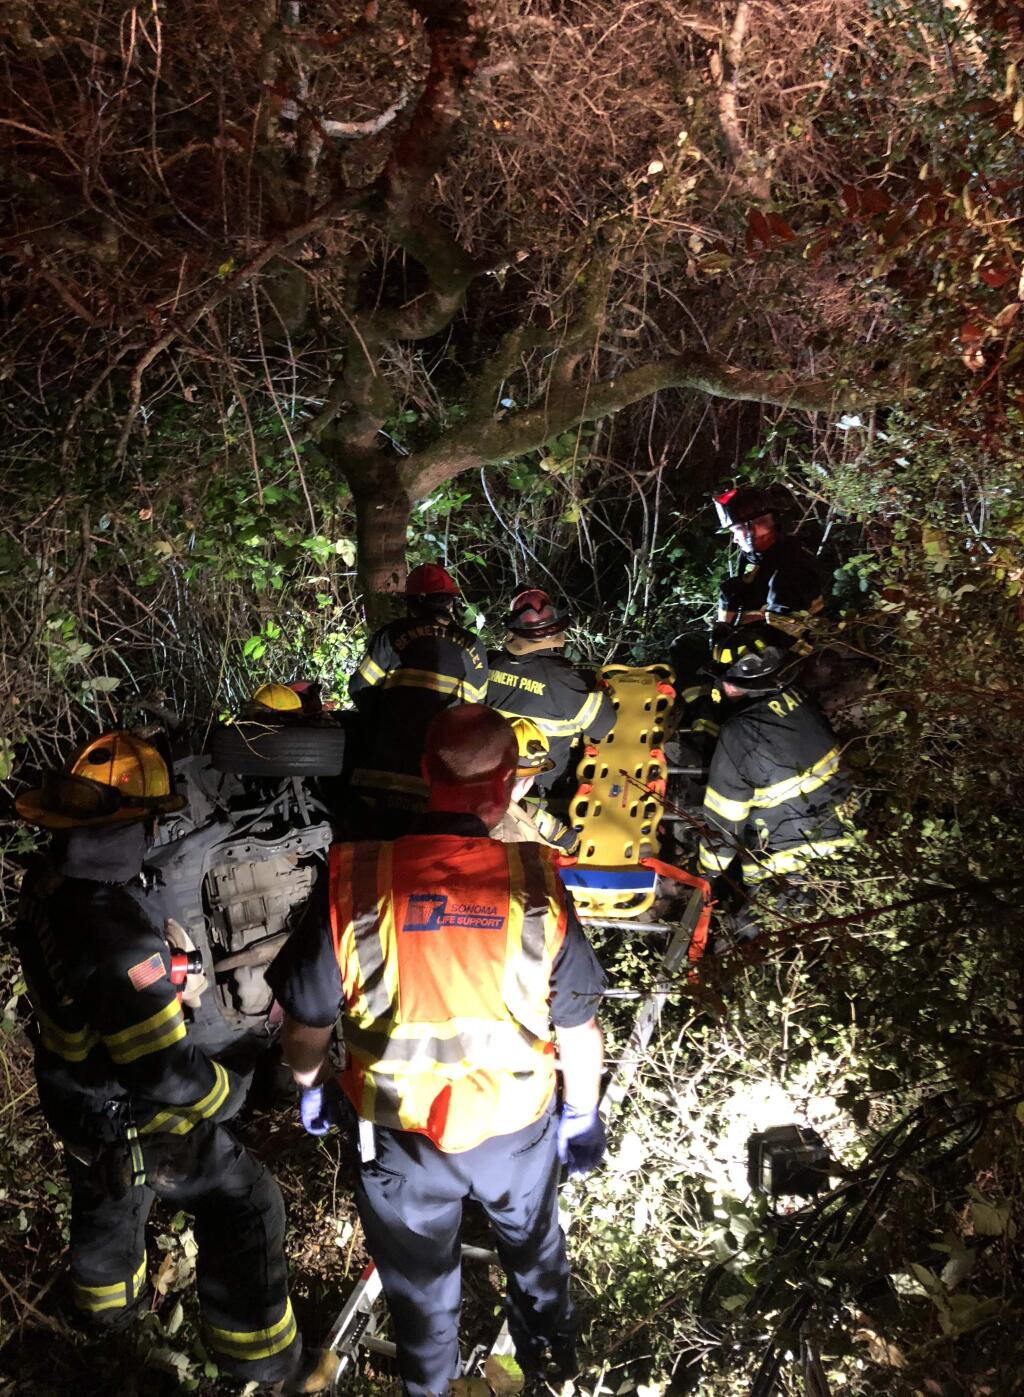 Emergency crews rescue a driver after a crash on Crane Canyon Road on Wednesday, Oct. 10, 2018. (COURTESY OF RANCHO ADOBE FIRE CAPTAIN JIMMY BERNAL)